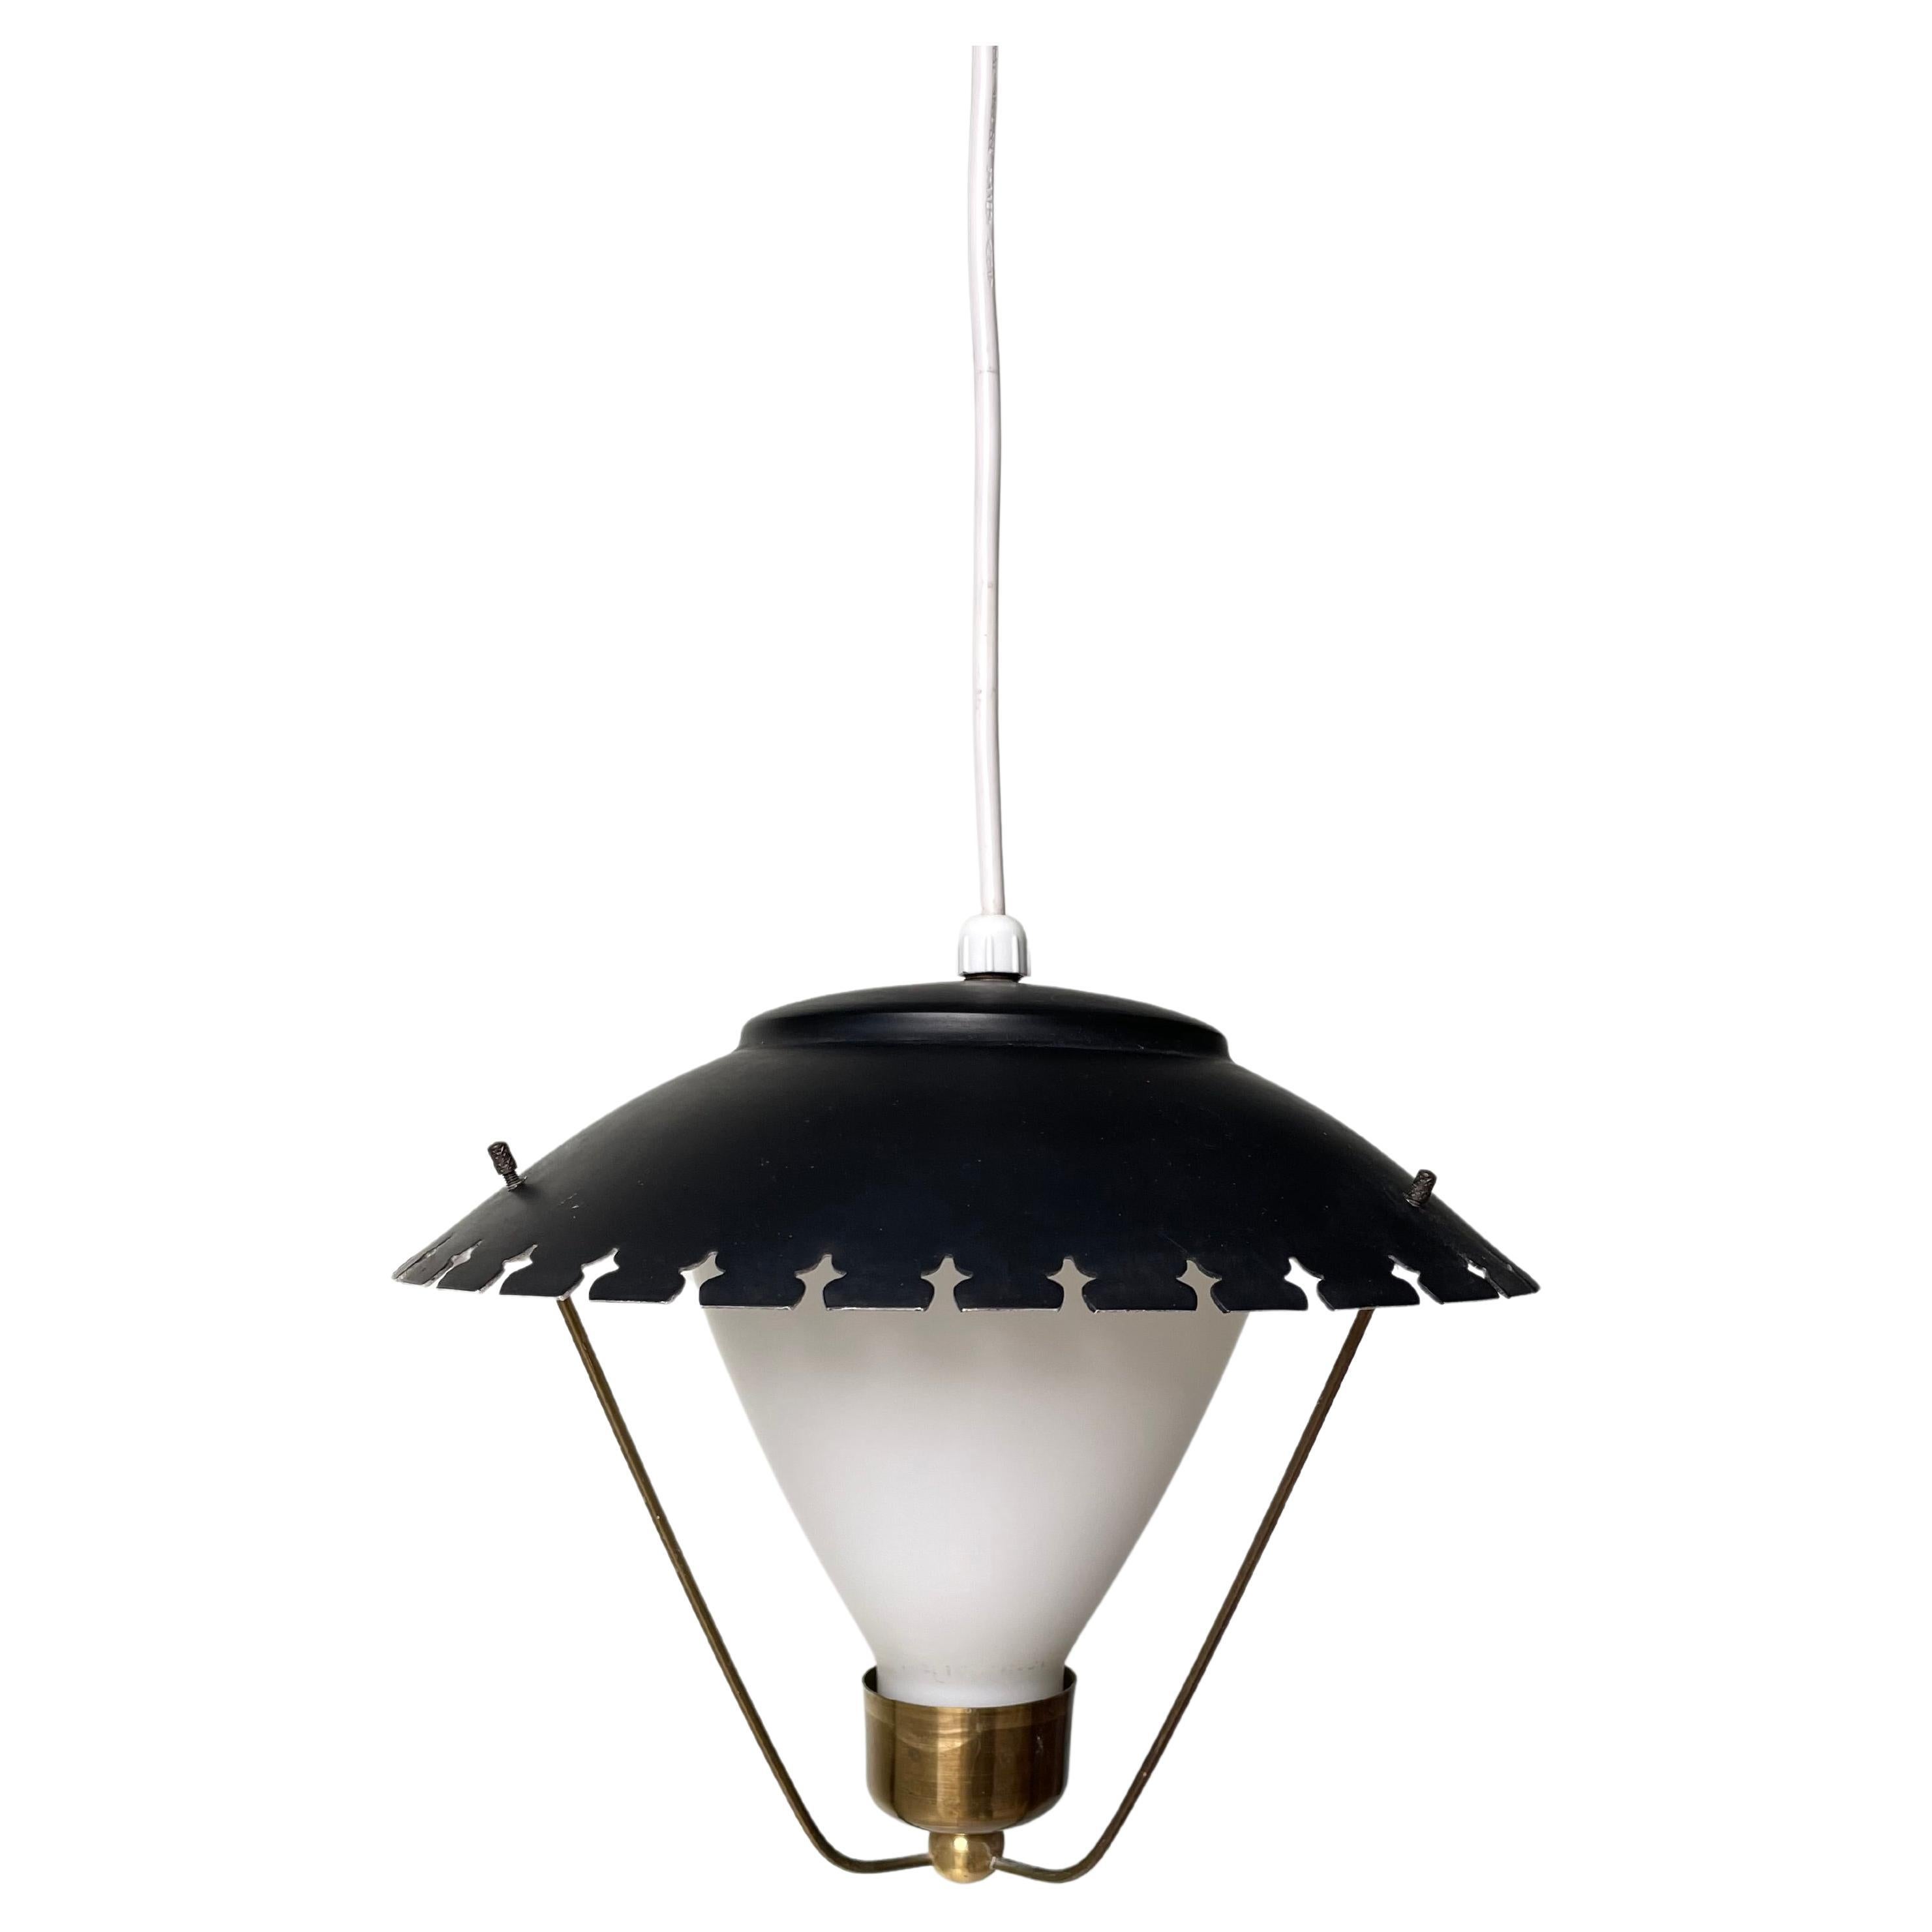 Classic Danish midcentury modern lighting design. Soft opaline glass on delicate brass mount with three thin arms on which the black roof with cross shaped edge rests. Attributed to Danish architect and designer Bent Karlby. Beautiful vintage